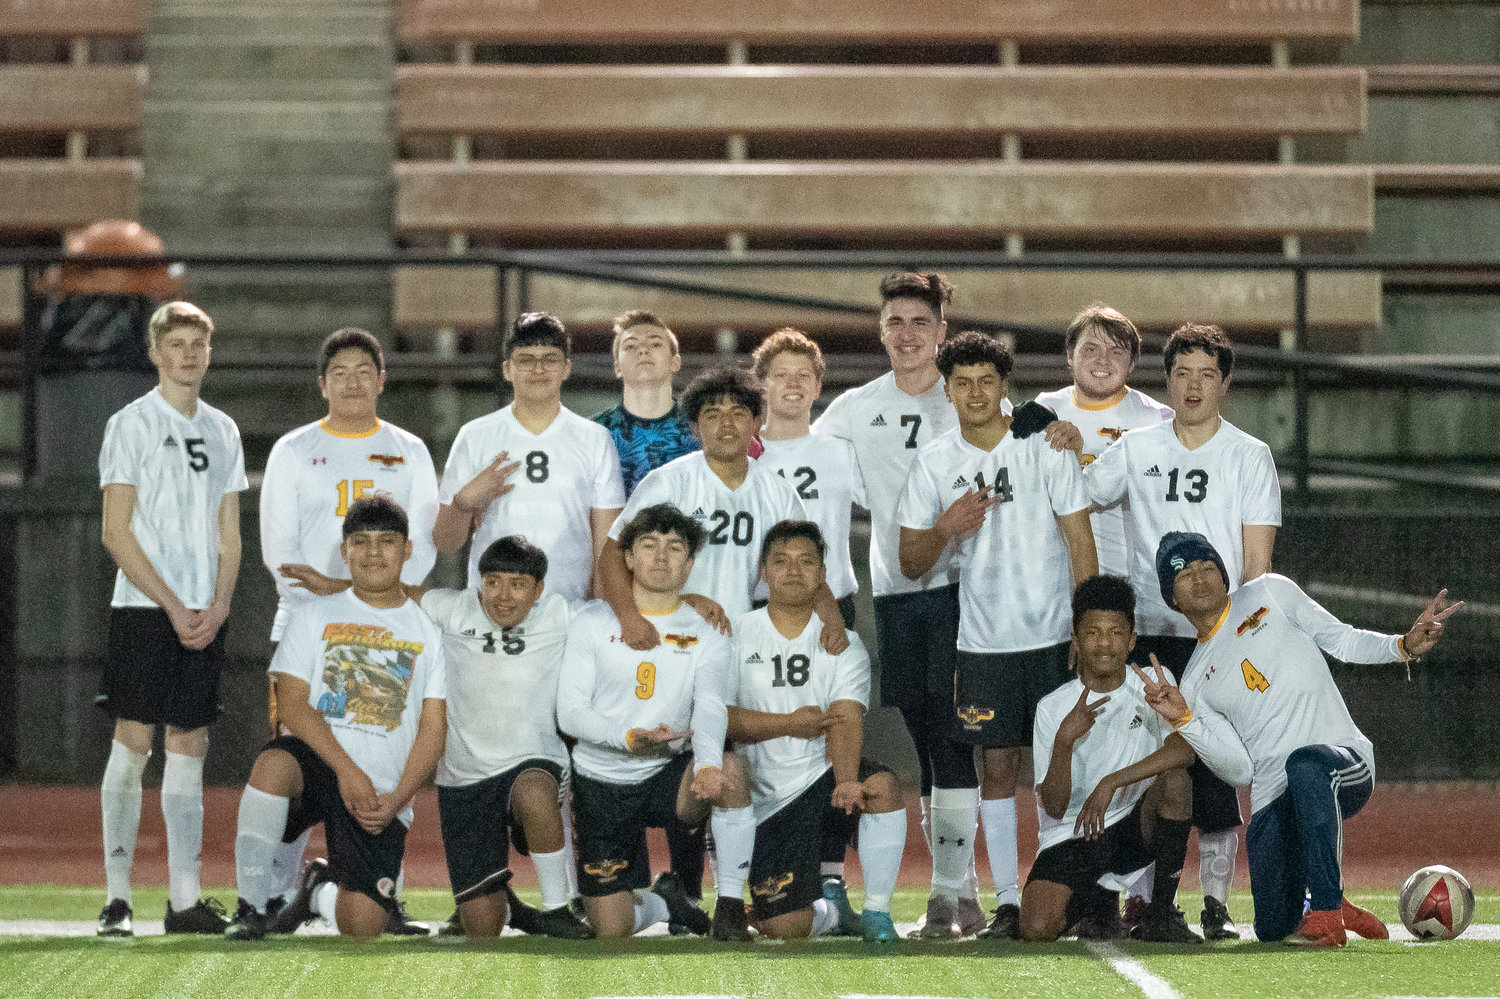 The Toledo-Winlock United boys soccer team poses for a team photo after a game at the Centralia Jamboree March 10.